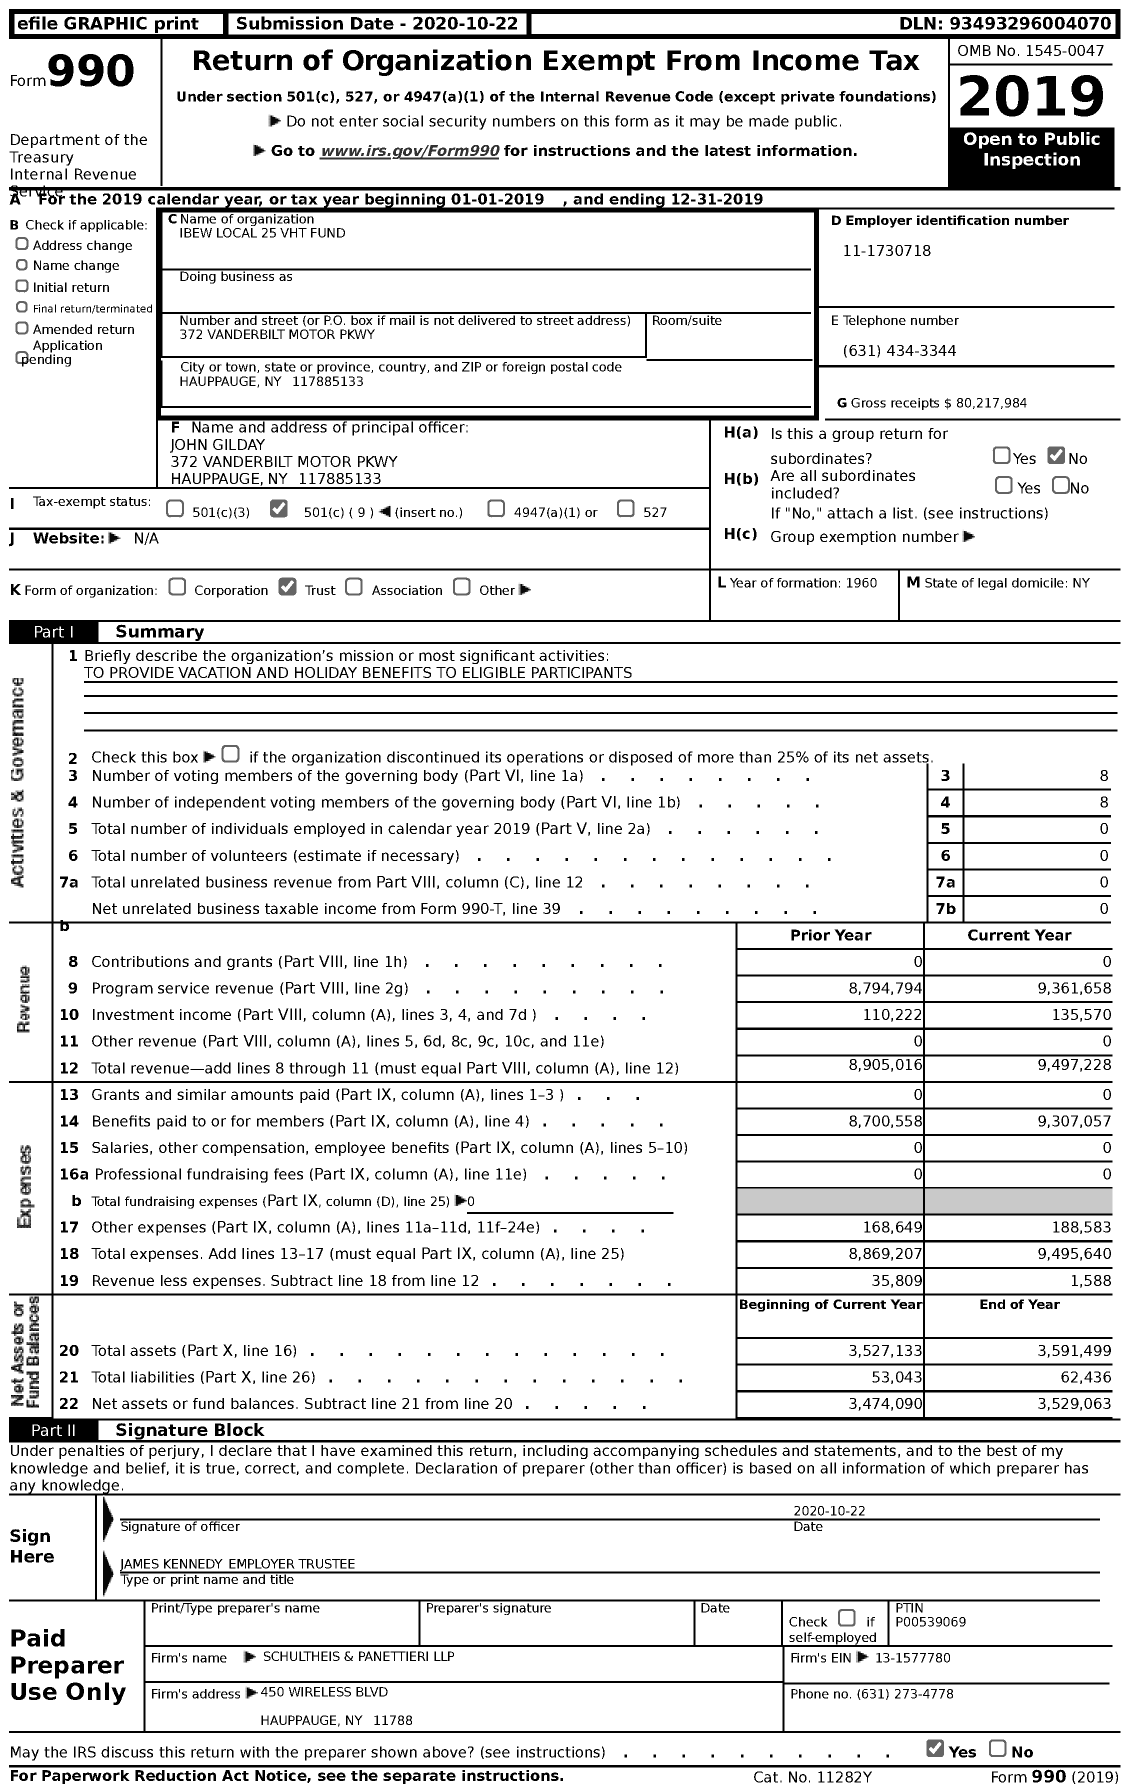 Image of first page of 2019 Form 990 for IBEW Local 25 VHT Fund